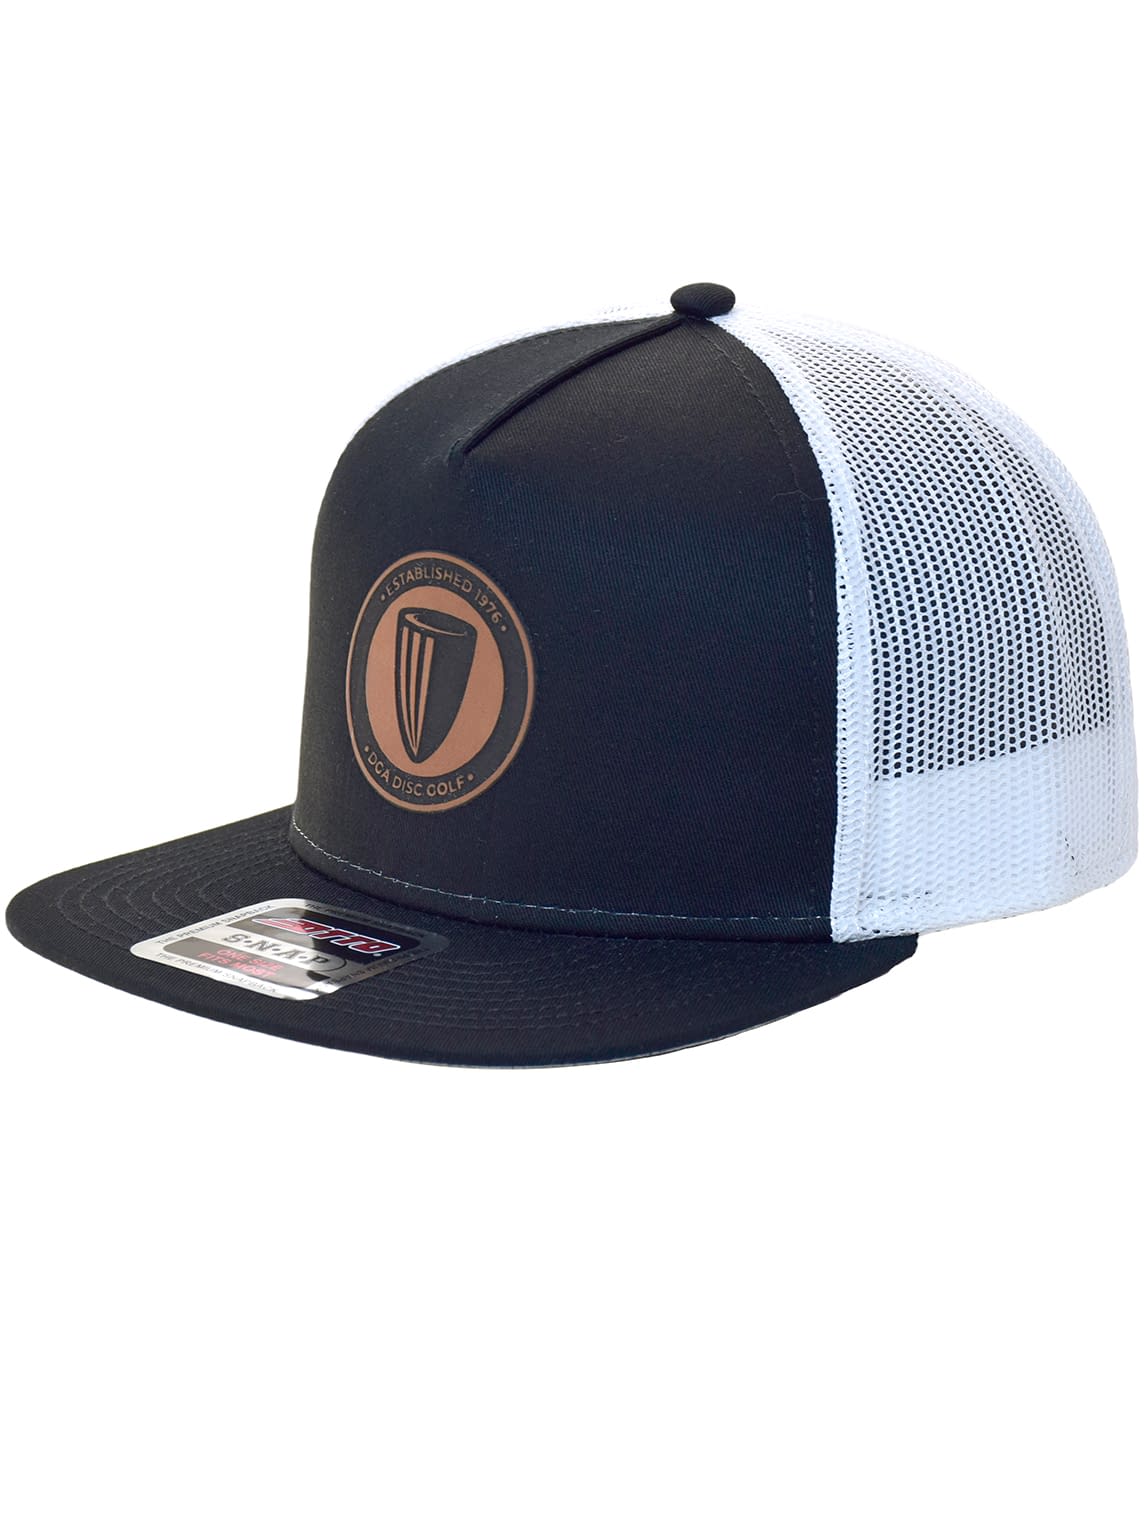 DGA Leather Patch Flat Bill Mesh Snap Back